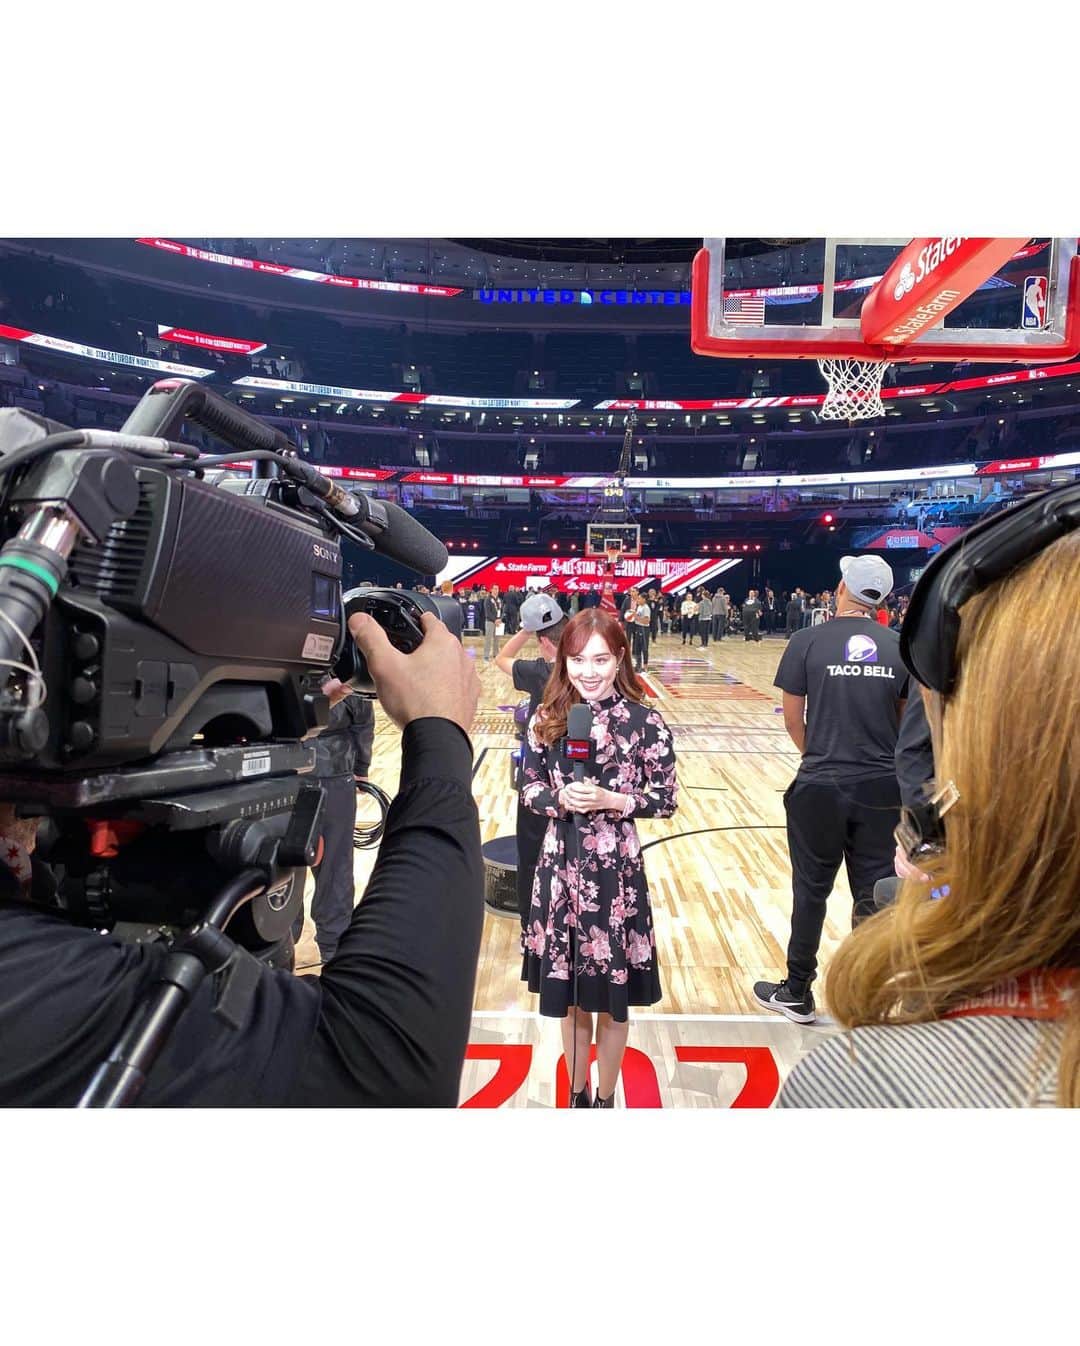 メロディー・モリタさんのインスタグラム写真 - (メロディー・モリタInstagram)「NBA All-Star 2020 in Chicago!!🏀✨ Tonight, I am interviewing one of the greatest All-Star players in history *live* from courtside before the All-Star Game! _ From the Rising Stars, I had a blast interviewing Rui Hachimura who made history by becoming the first Japanese player ever to be a part of the All-Star games! It was awesome getting to know and sharing more of his personal side + fun BTS stories with his fellow teammates and first memorable All-Star😄⭐️ _ Yesterday morning, I also had an opportunity to do a sit-down interview with Devin Booker who was selected as an All-Star this year!! He is actually one player that I've had the honor to speak with at all three All-Star Weekends I've covered. _ I asked him to share the details on when and how he found out that he was named an All-Star, his journey on how he got to where he is today, his connection and touching stories with his idol Kobe Bryant, and much more!☺️ Although he was just one point shy from being the crowned the winner of the 3-Point Contest again this year, he still holds the highest record even after the addition of two 3-balls this year. He is an unbelievable shooter and such a down-to-earth wonderful player to talk to!☺️ _ My interview with Devin and all the other players I've covered during the media session is scheduled to air in a series, so please look forward to them all on NBA Rakuten! Hope you all join in the fun for tonight's All-Star Game!!🙌🔥 _ いよいよ今日は、オールスターゲーム！ 今年大注目の 「あの!!」 オールスターゲーム出場選手に、試合前コートサイドでインタビューを行う予定です‼️ NBA Rakutenでの生放送もありますので、引き続き是非ご覧ください！果たしてどの選手が来るのか?! どうぞお楽しみに！😆 * 初日のAll-Star Rising Starsでは、NBA史上初の日本人プレイヤーとして出場した #八村塁 選手に試合前のコートサイドで単独インタビューをさせて頂きました！✨ ウィザーズ、そして オールスターでの面白エピソードや舞台裏についてのお話には、八村選手とチームメイト達との和気藹々さとお人柄が伝わってくる、とてもホッコリ癒されるインタビューとなりました☺️ * そして昨日は3Pコンテスト前に、オールスターゲーム初出場となった #デビンブッカー 選手に2018年と2019年に続き、今年３度目の単独インタビューを10分間も行いました!!✨ 今回のお話は、初出場する事が決定した瞬間の詳しいお話、コービーとの素敵な想い出、ここまでの道のり、メンタリティー、NBAを目指す人々へのアドバイス、コンテストとオールスターについて、更には東京オリンピックに向けての挑戦や日本の皆様へのメッセージなどなど！3Pコンテストでは惜しくも１点の差で最後に破れてしまいましたが、アリーナ中をハラハラドキドキ大いに楽しませてくれました。 * 一昨日、昨日と囲みインタビューでも様々な選手達から沢山のコメントを頂きましたので、そちらもお楽しみに！😊 #NBA #NBAAllStar #NBARakuten #RuiHachimura #DevinBooker」2月17日 1時45分 - melodeemorita